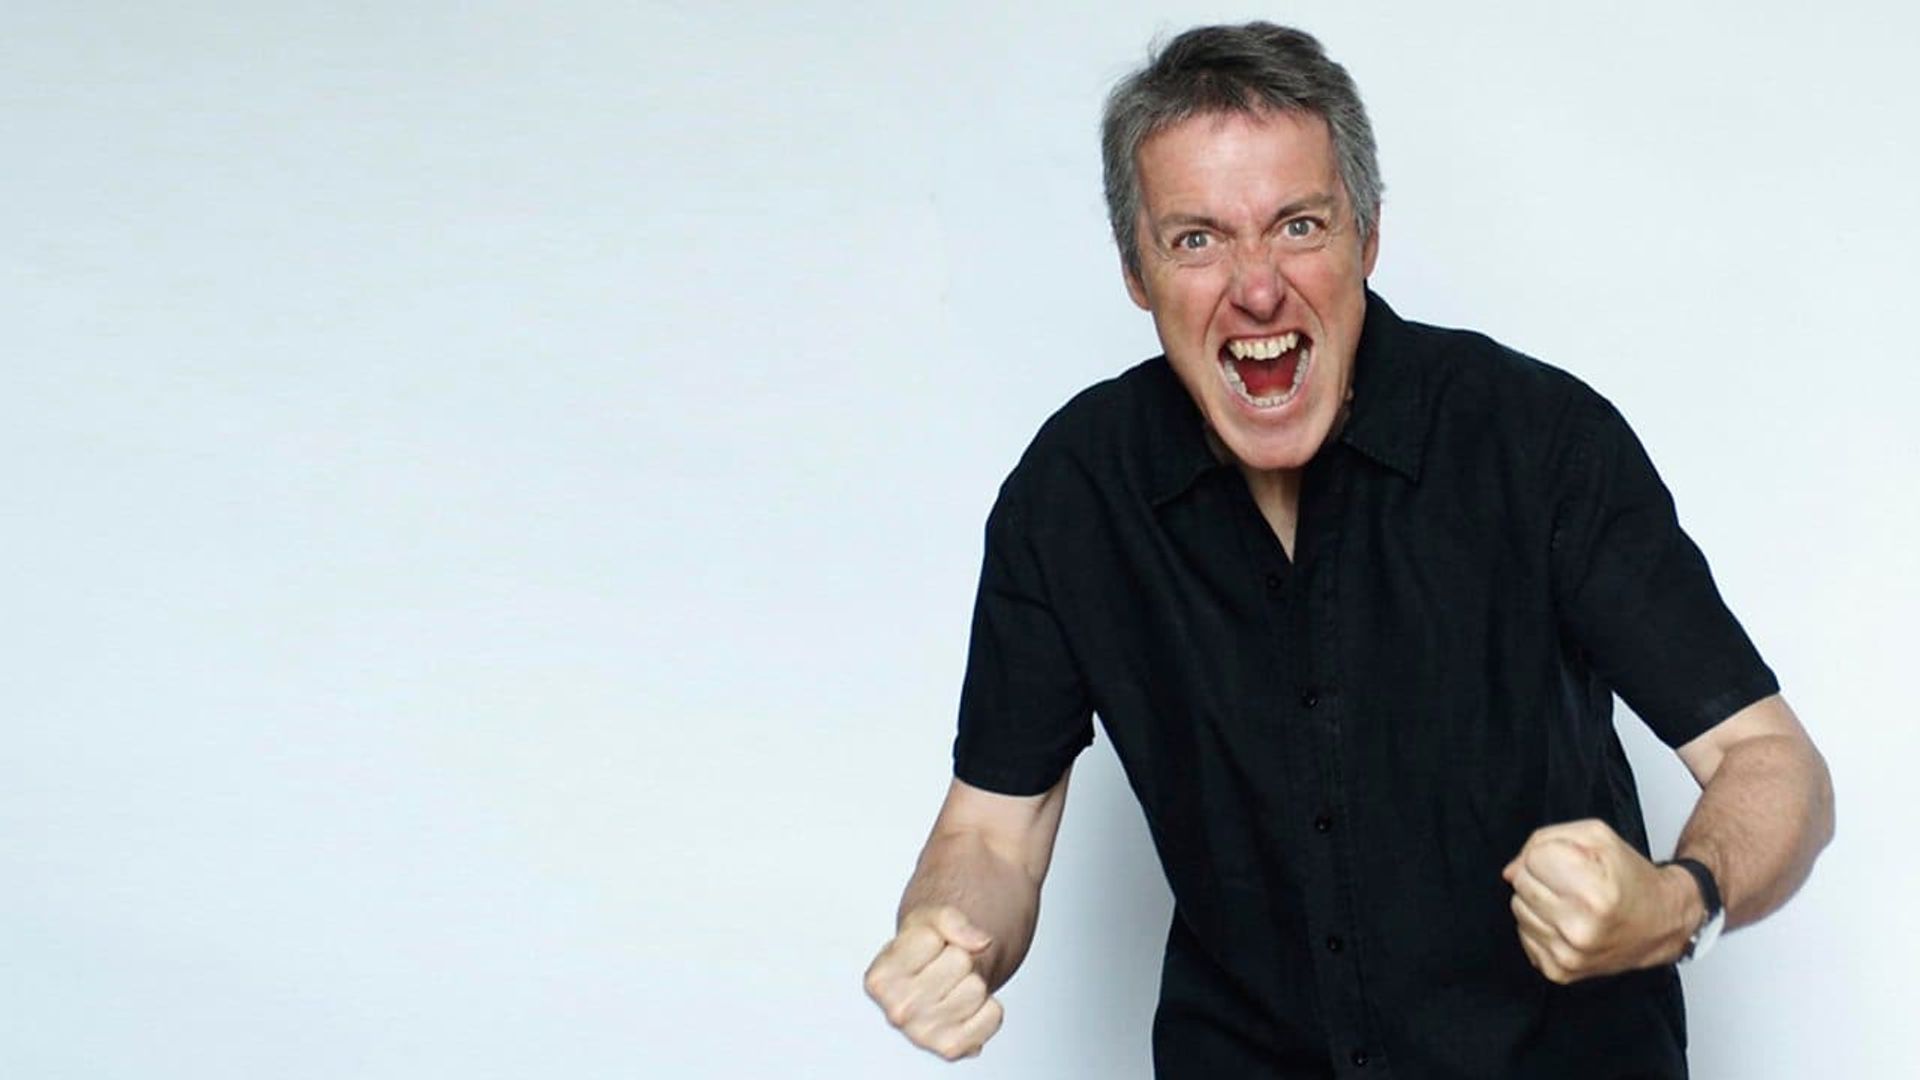 Losing It: Griff Rhys Jones on Anger background